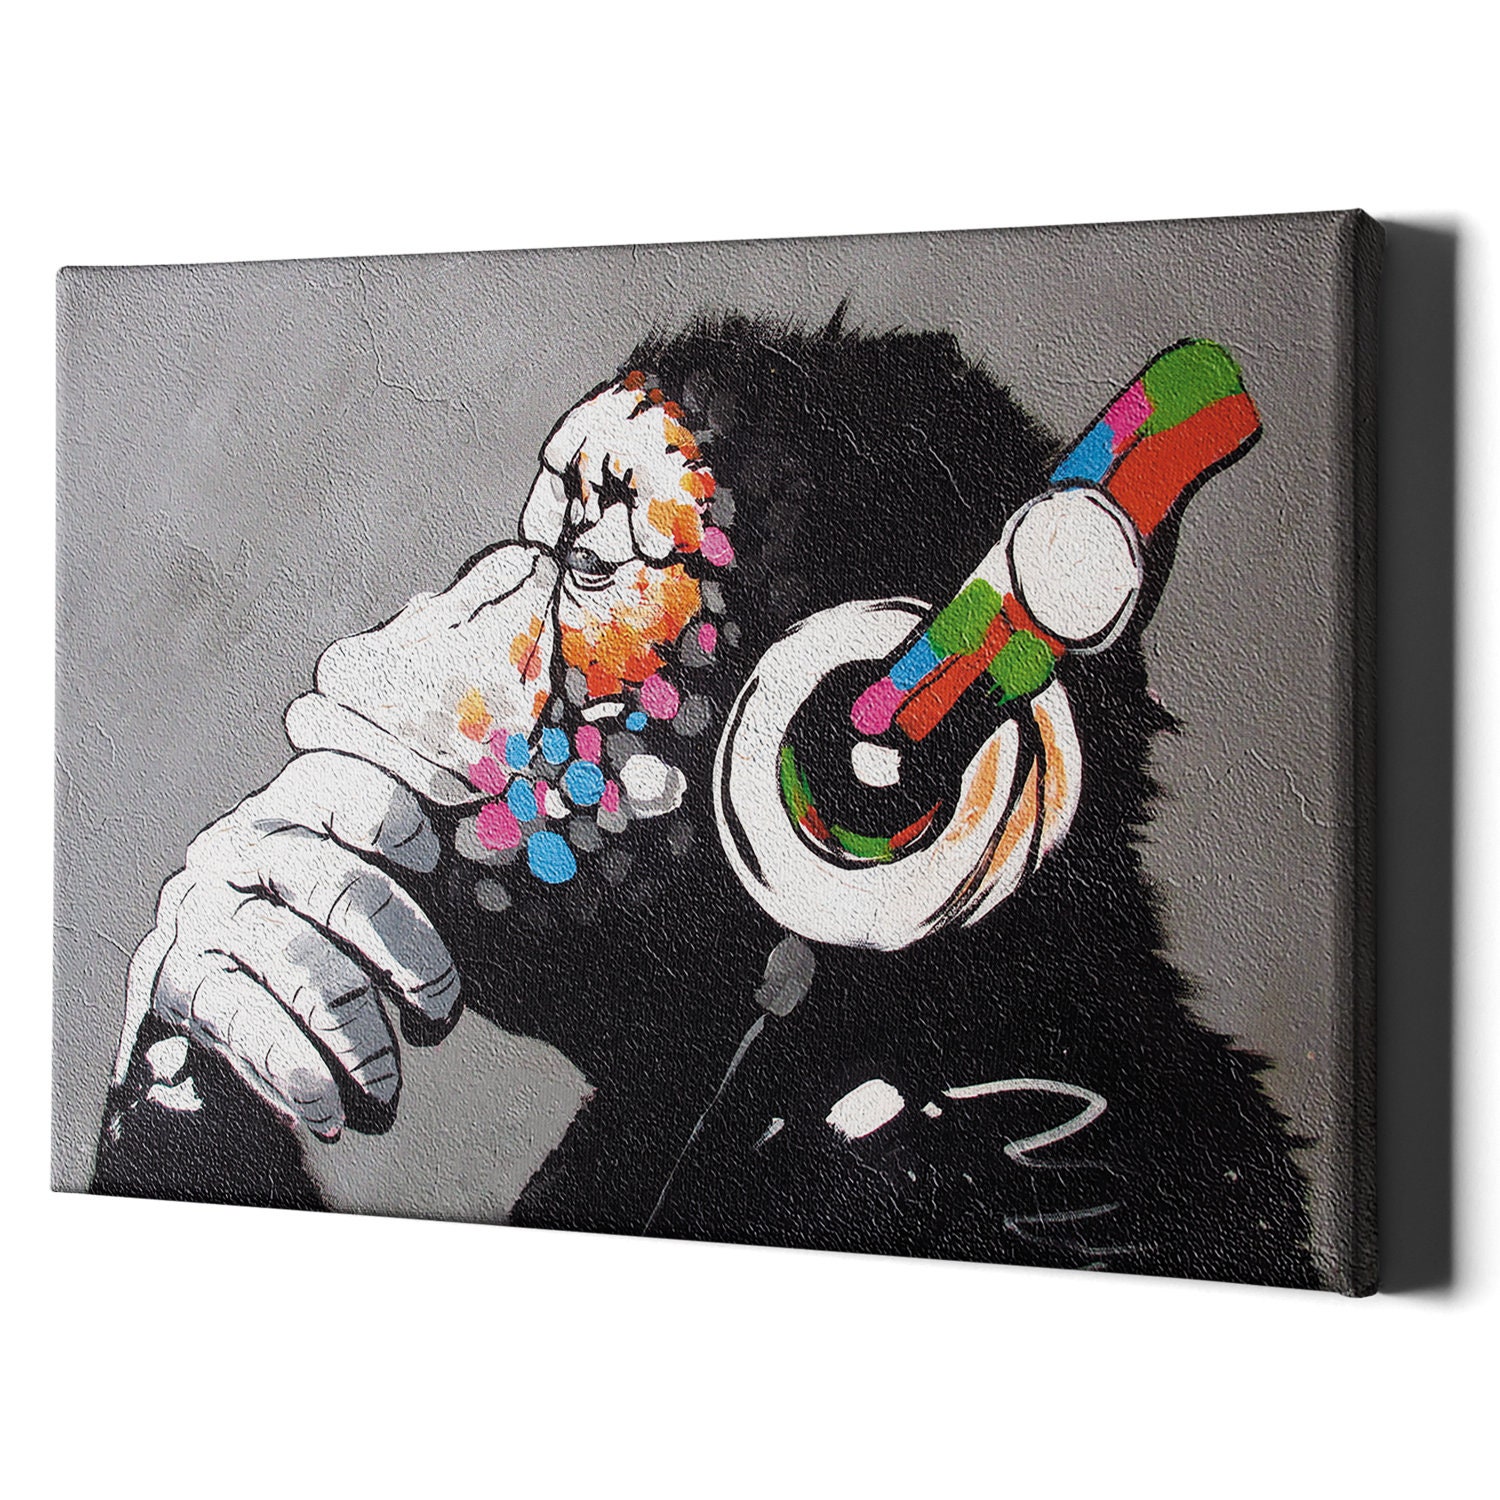 BANKSY ONE ORIGINAL THOUGHT WALL ART PICTURE ON FRAMED CANVAS WALL ART DECOR 